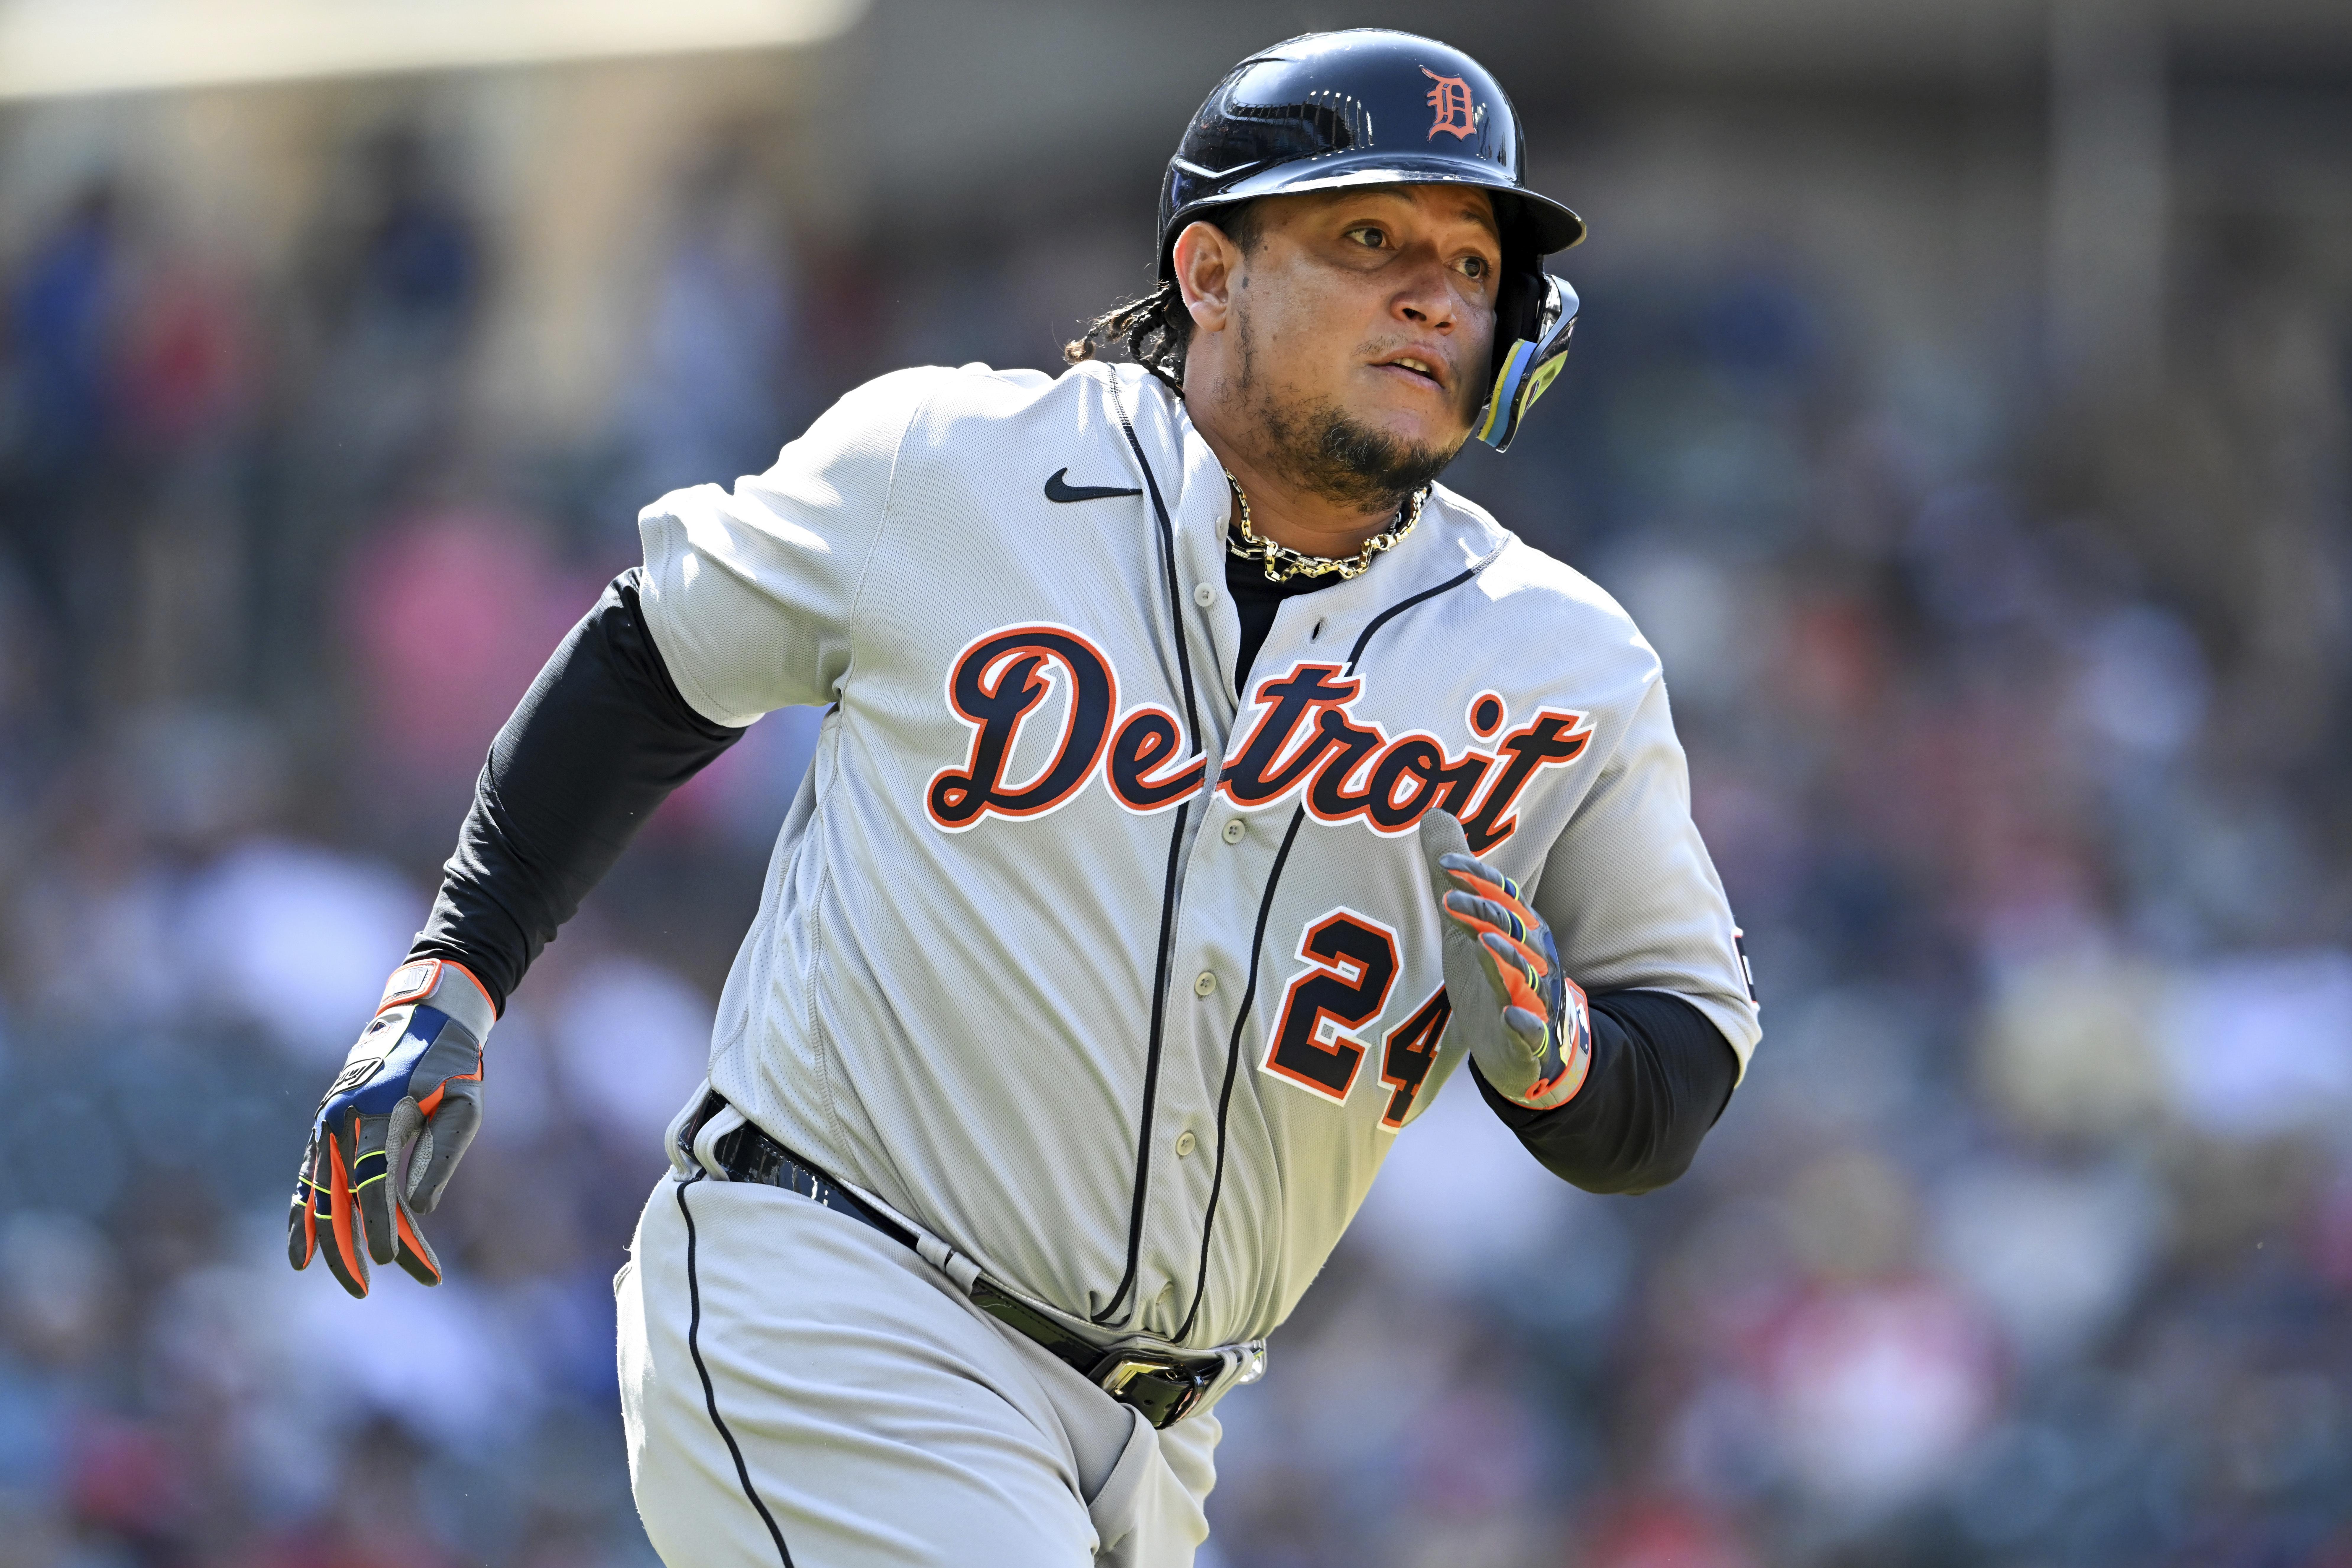 Kerry Carpenter's first multi-home run game powers Detroit Tigers